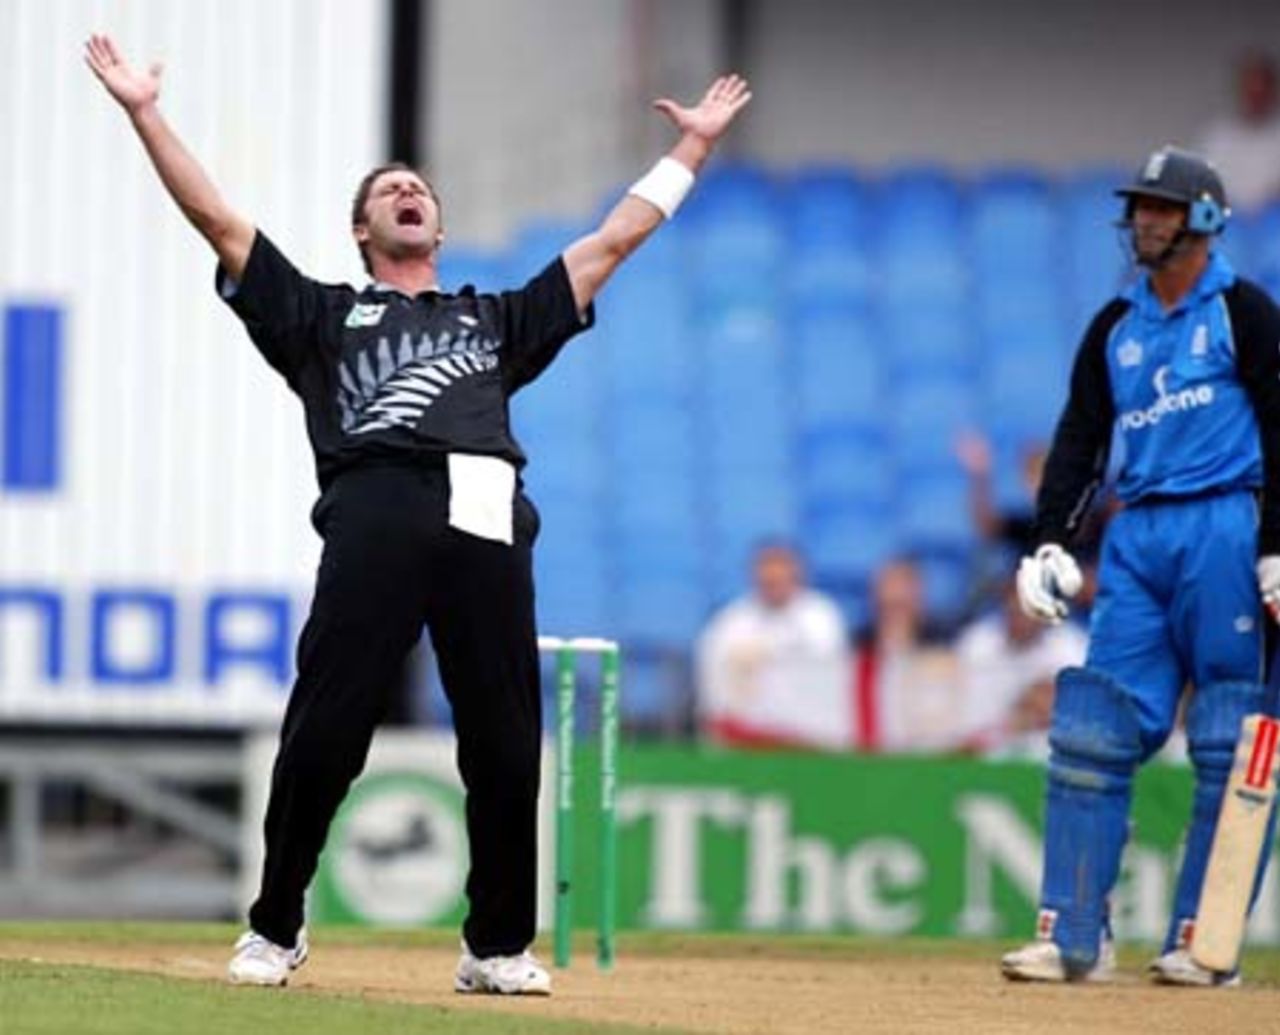 New Zealand bowler Chris Cairns celebrates a successful appeal for lbw against England batsman Nasser Hussain. Hussain was dismissed for 17 during Cairns' spell of 2-39 from eight overs. 4th ODI: New Zealand v England at Eden Park, Auckland, 23 February 2002.